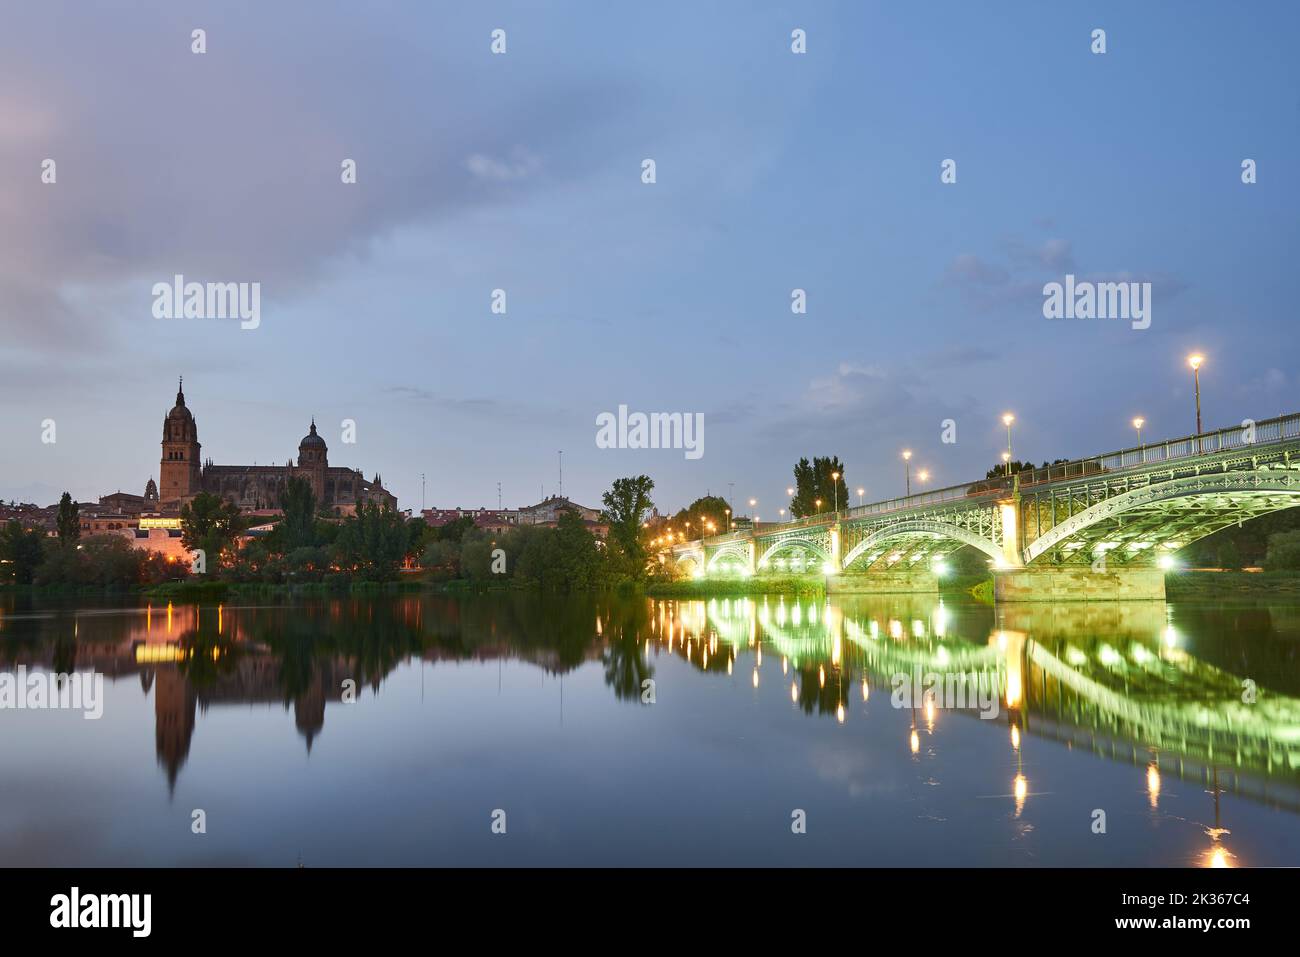 Cathedral of Salamanca at night and Enrique Esteban Bridge view from the Tormes River, Salamanca City, Spain, Europe. Stock Photo